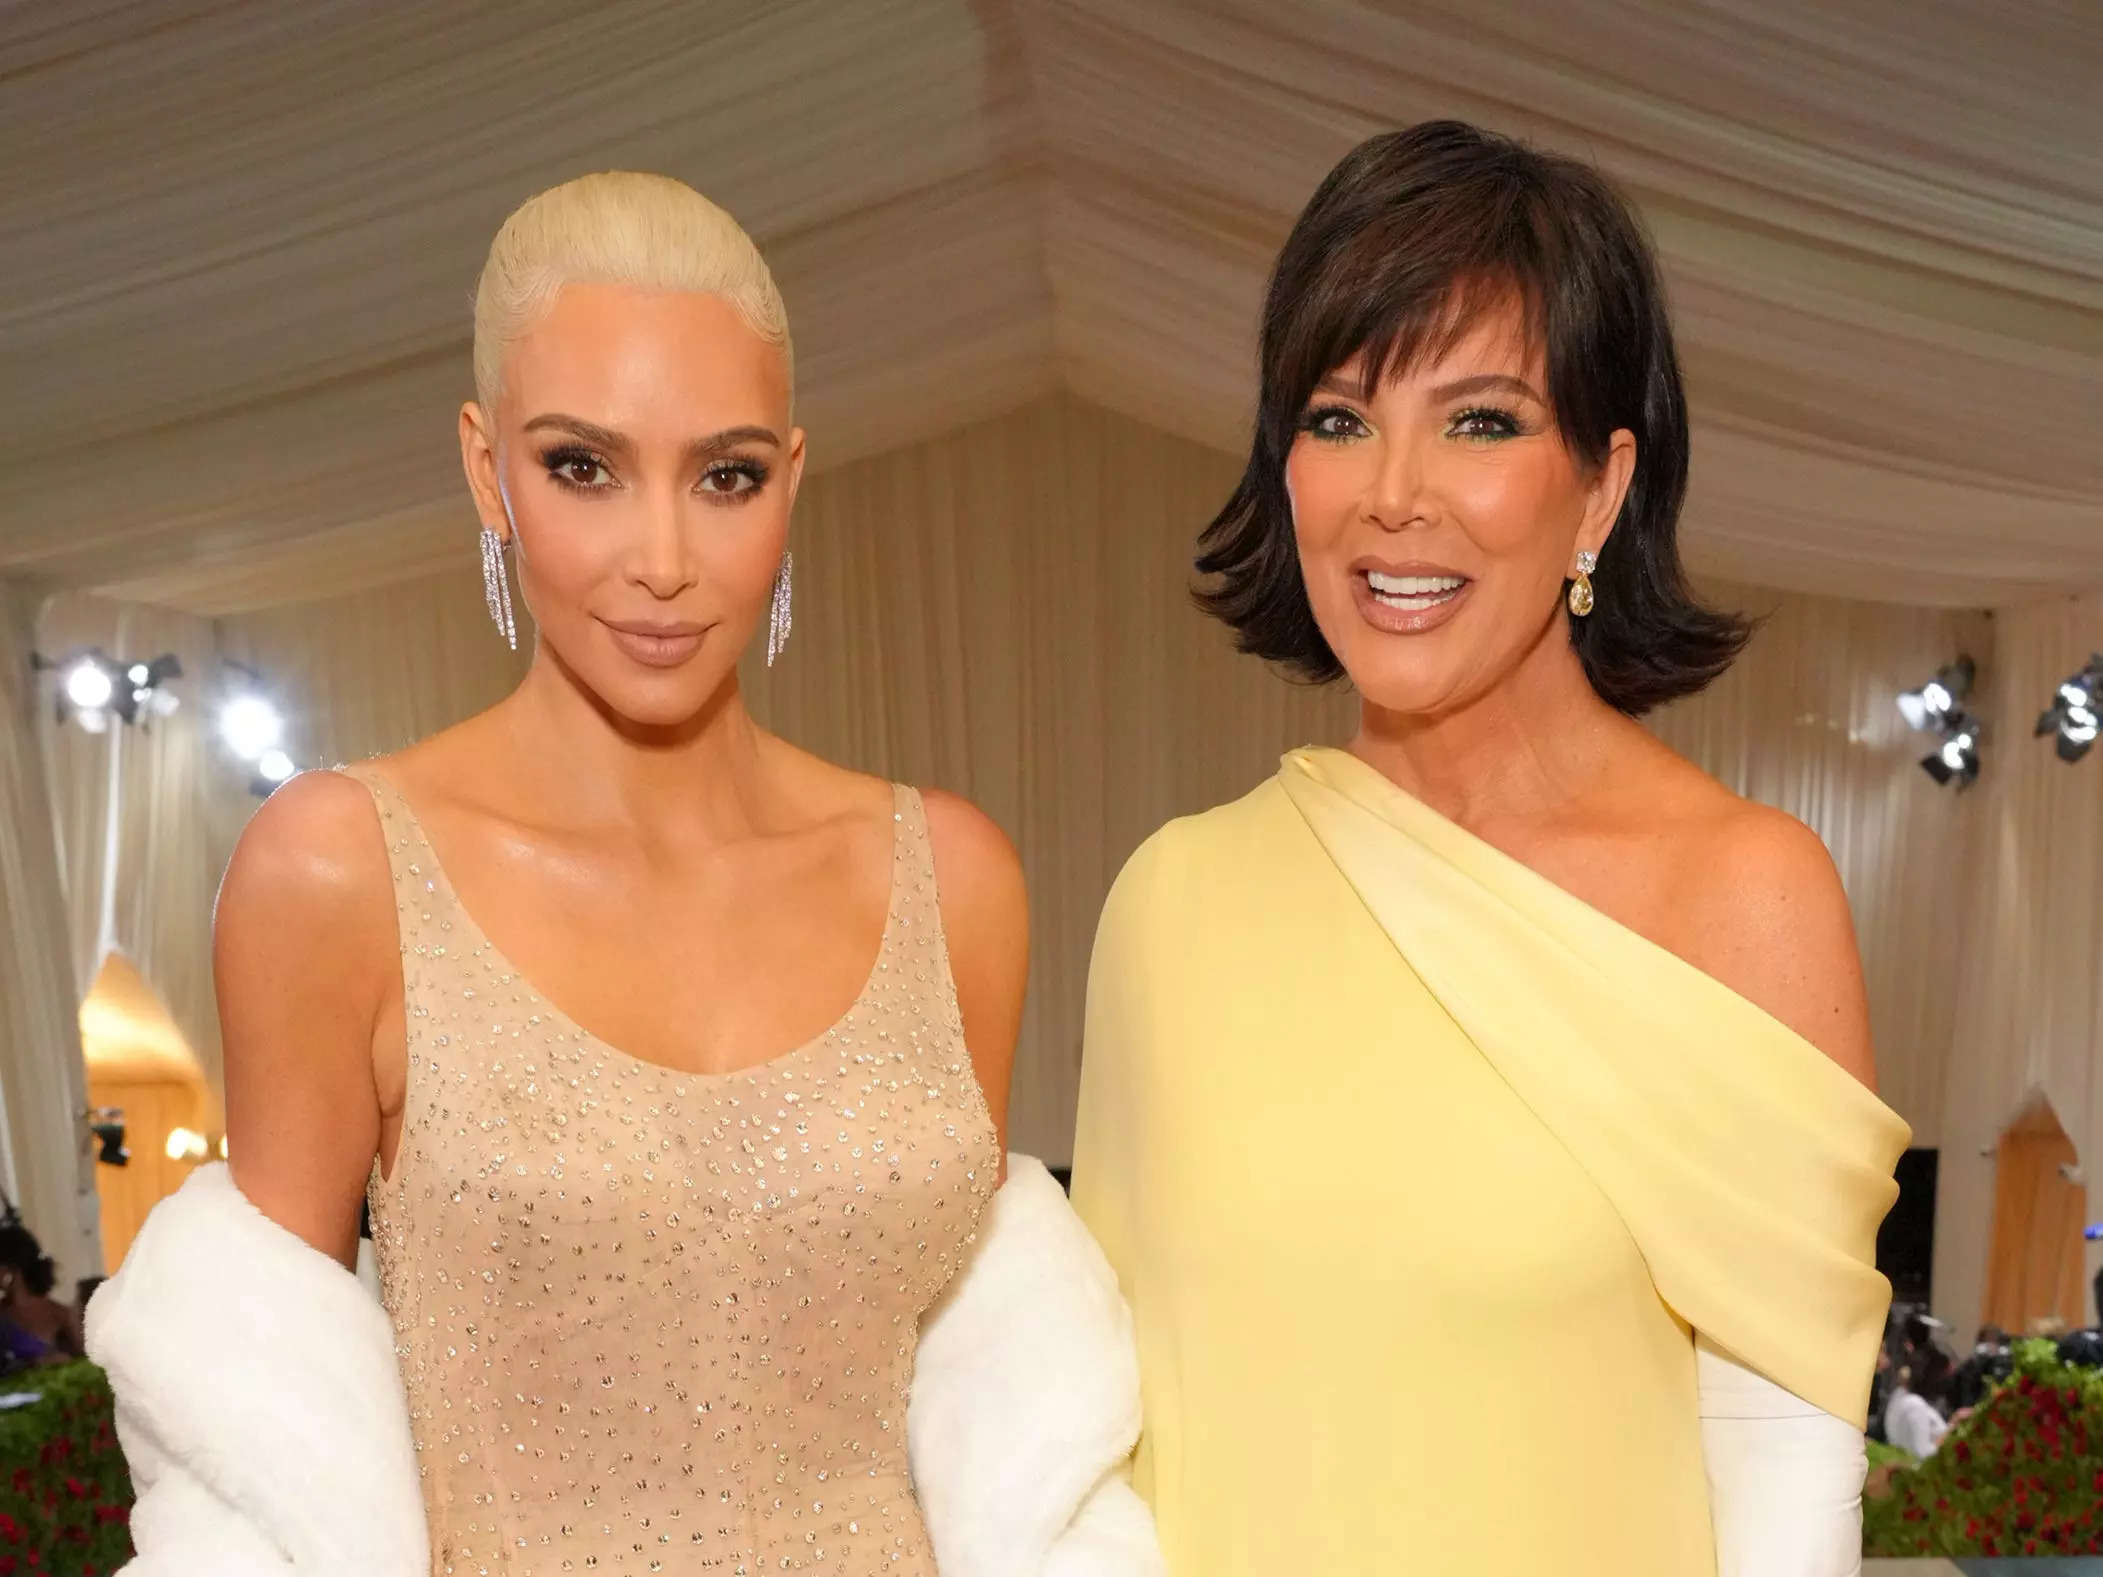 Kim Kardashian reveals Kris Jenner crashed her first major photo shoot and  upstaged her by showing up in 'head to toe' vintage Chanel